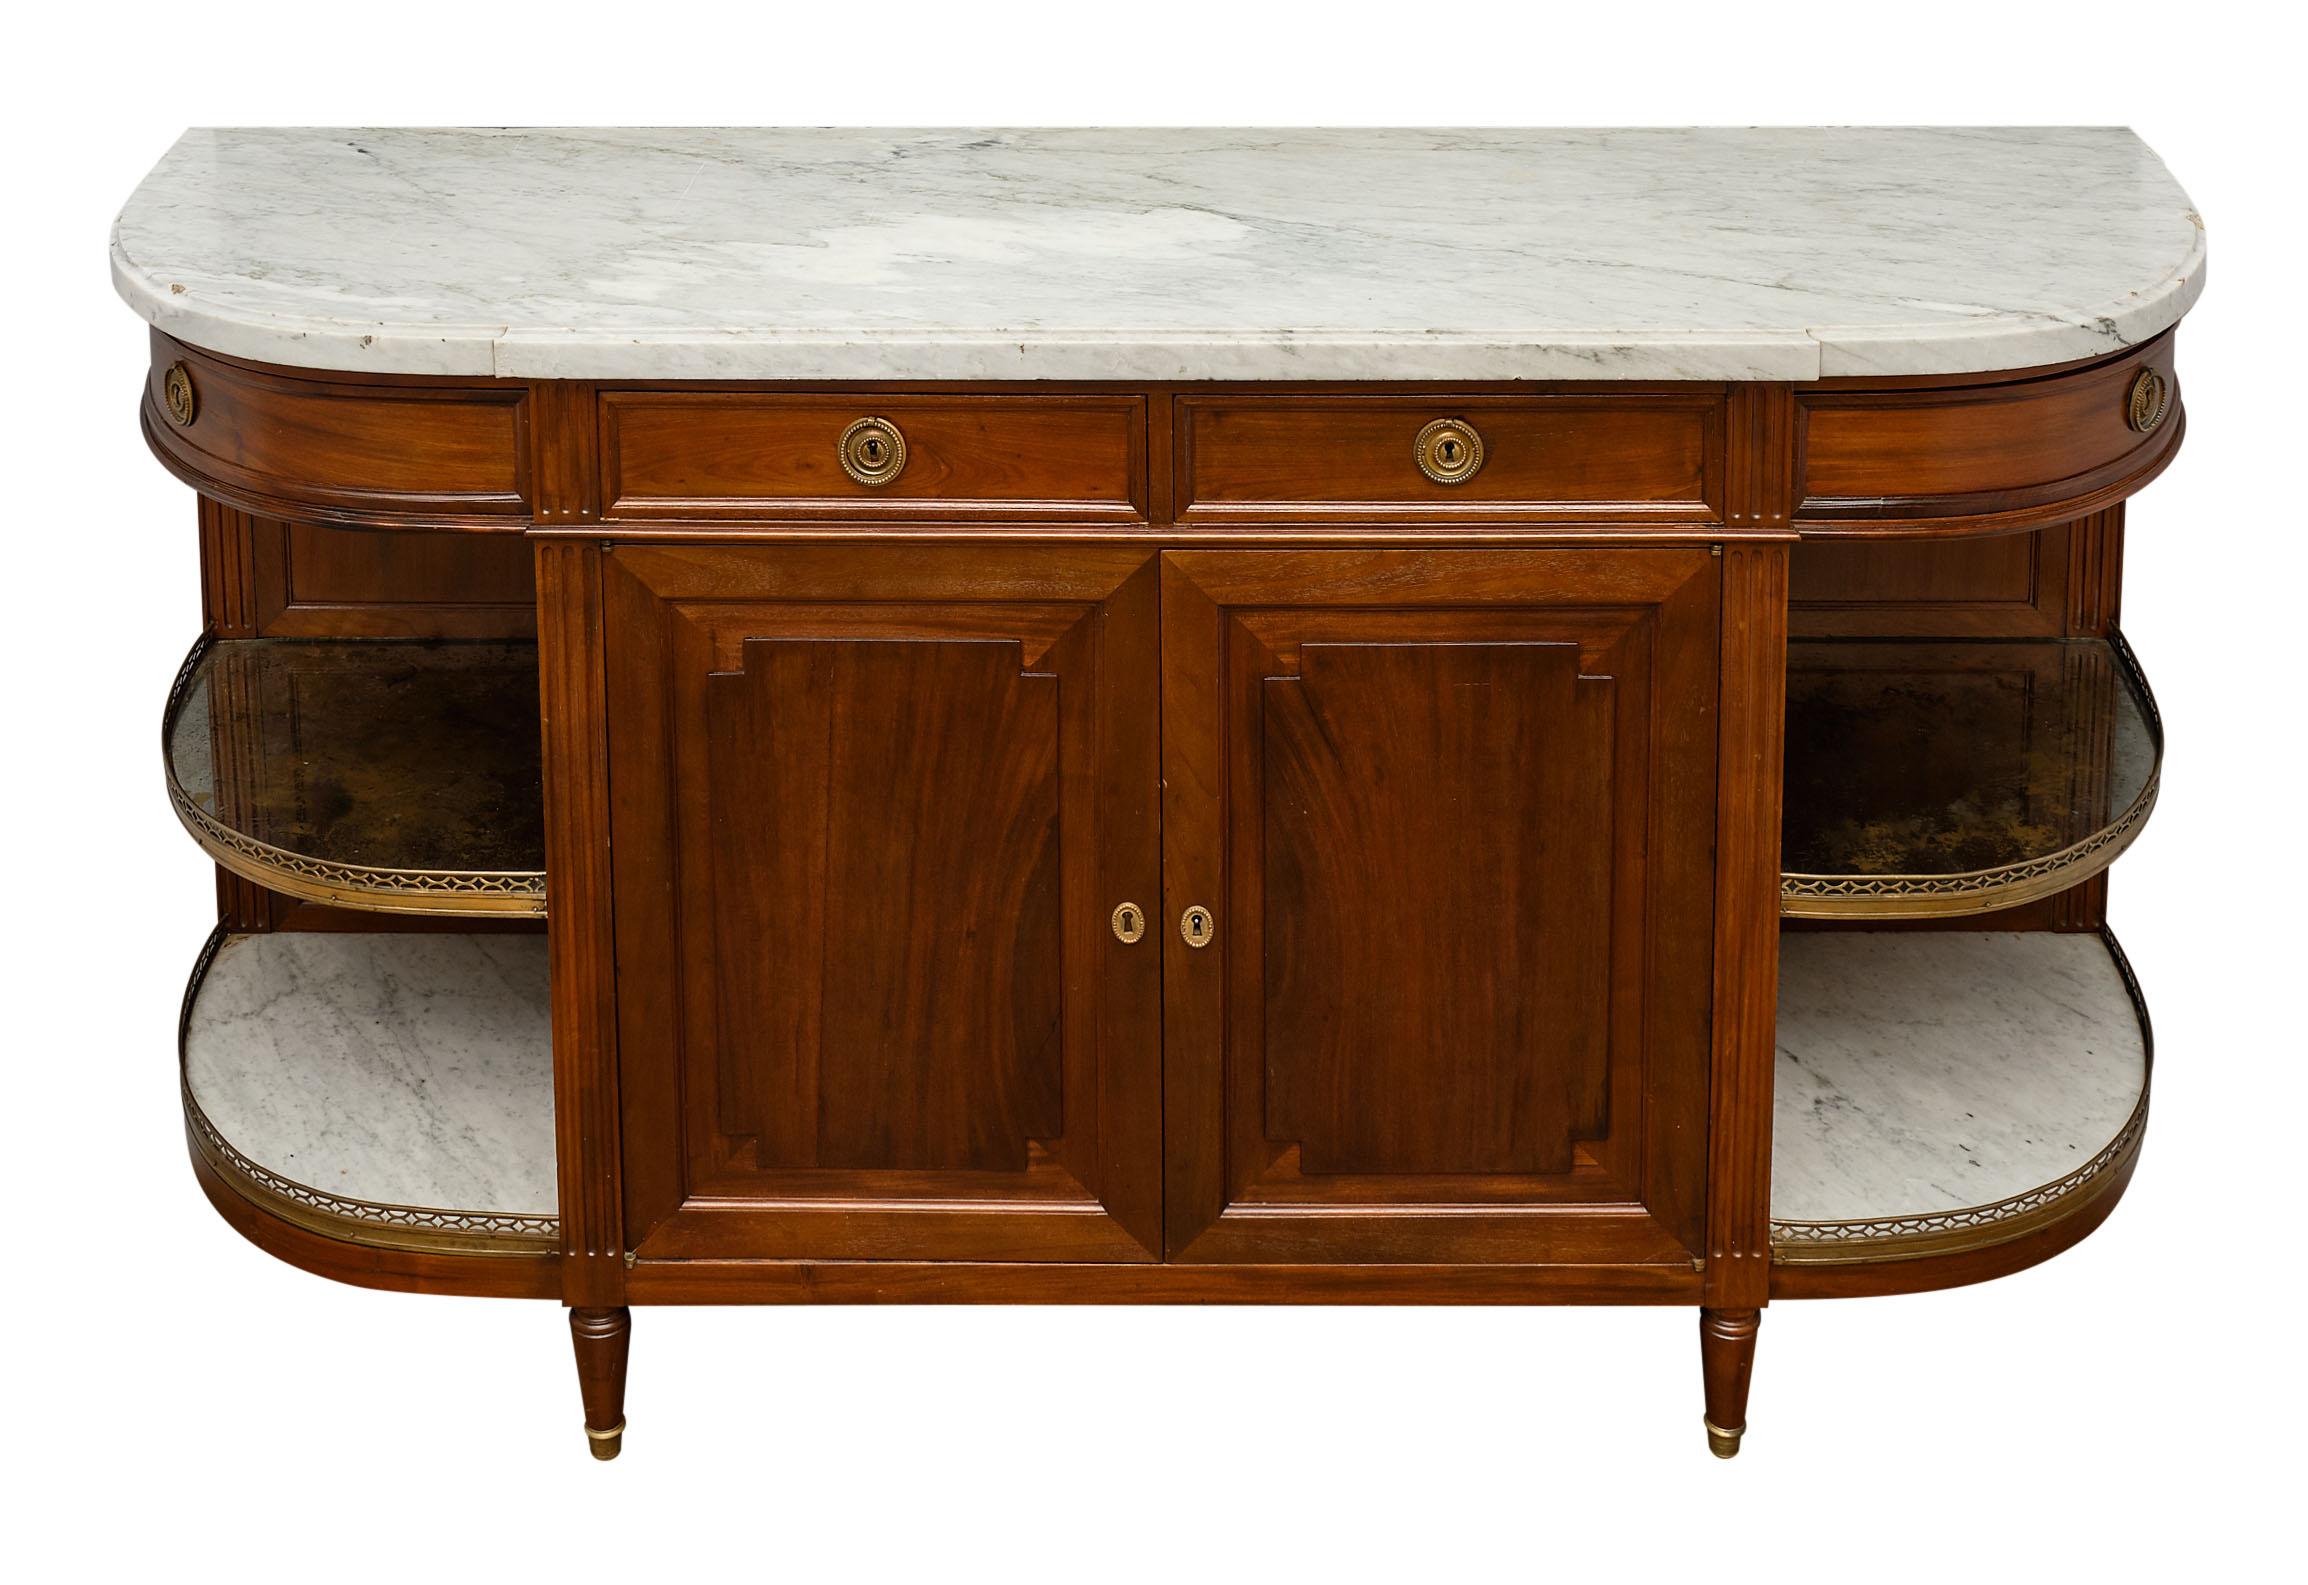 Louis XVI style demilune buffet made of mahogany with a Carrara marble top, open shelving, and brass galleries. 

This piece has wear to the marble top due to antique condition, including chips.